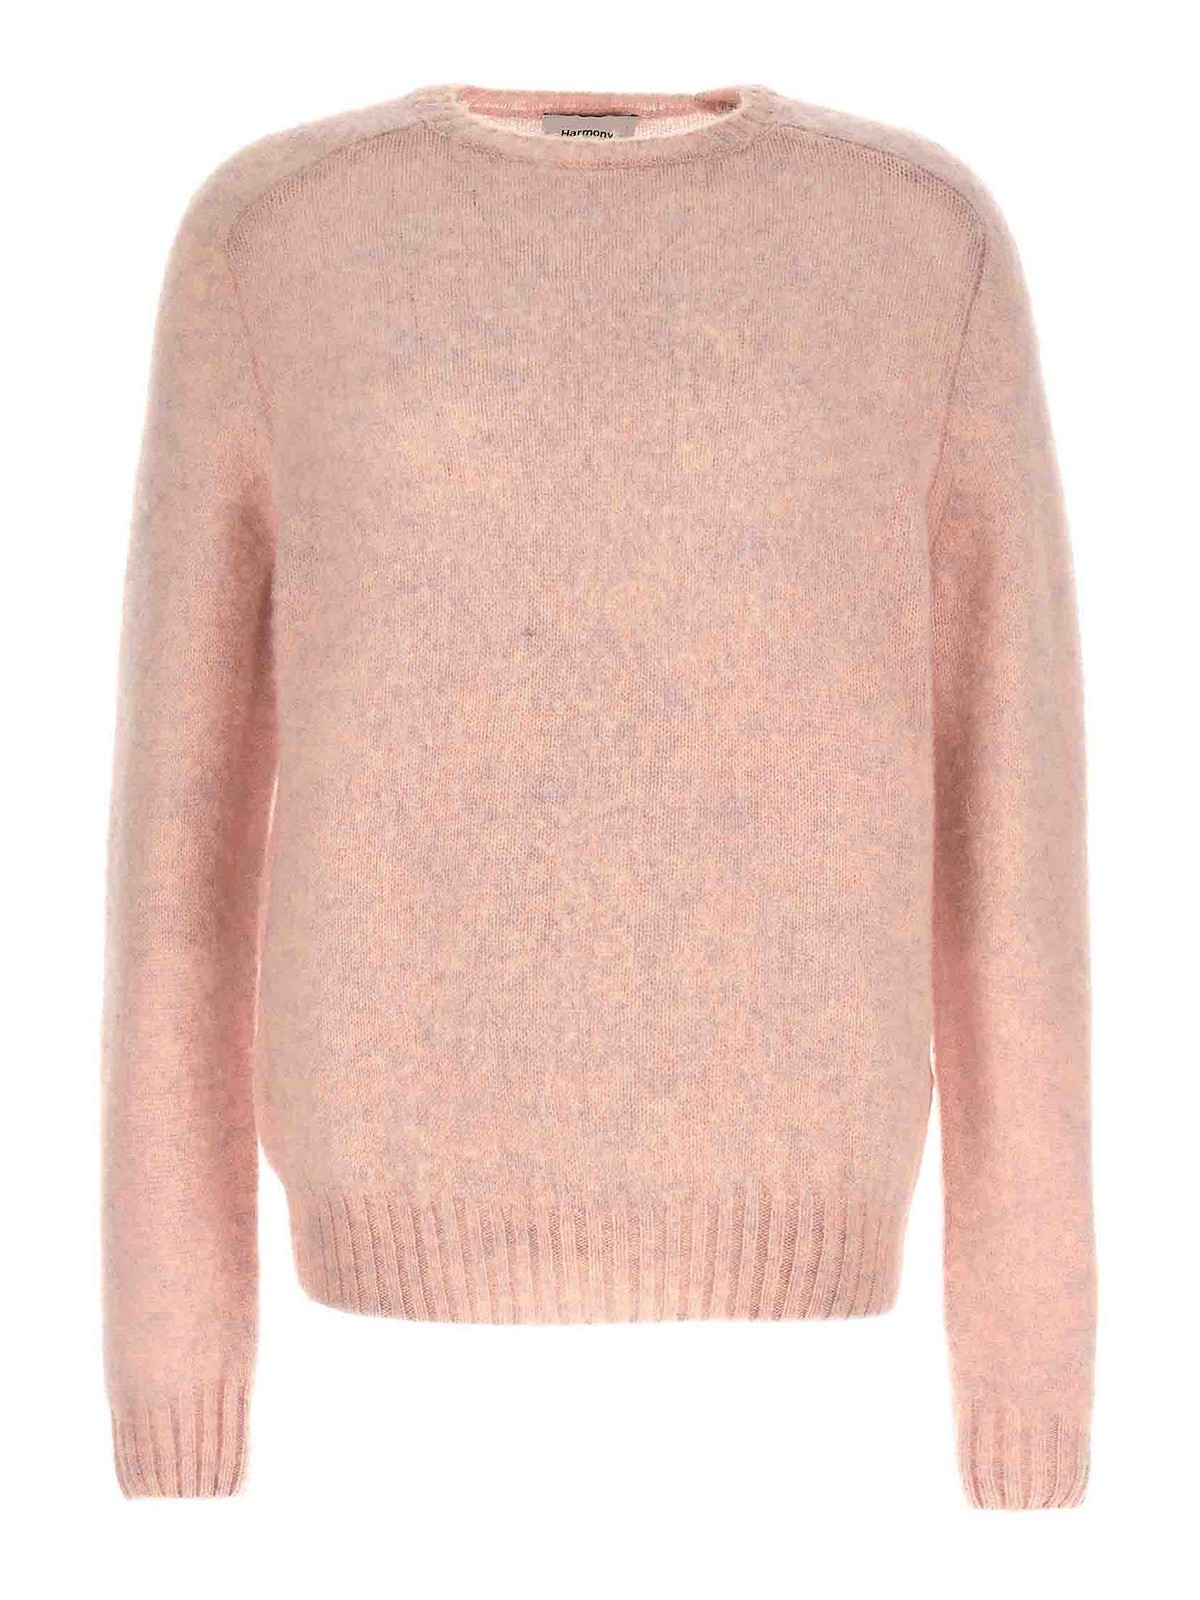 Harmony Shaggy Sweater In Nude & Neutrals